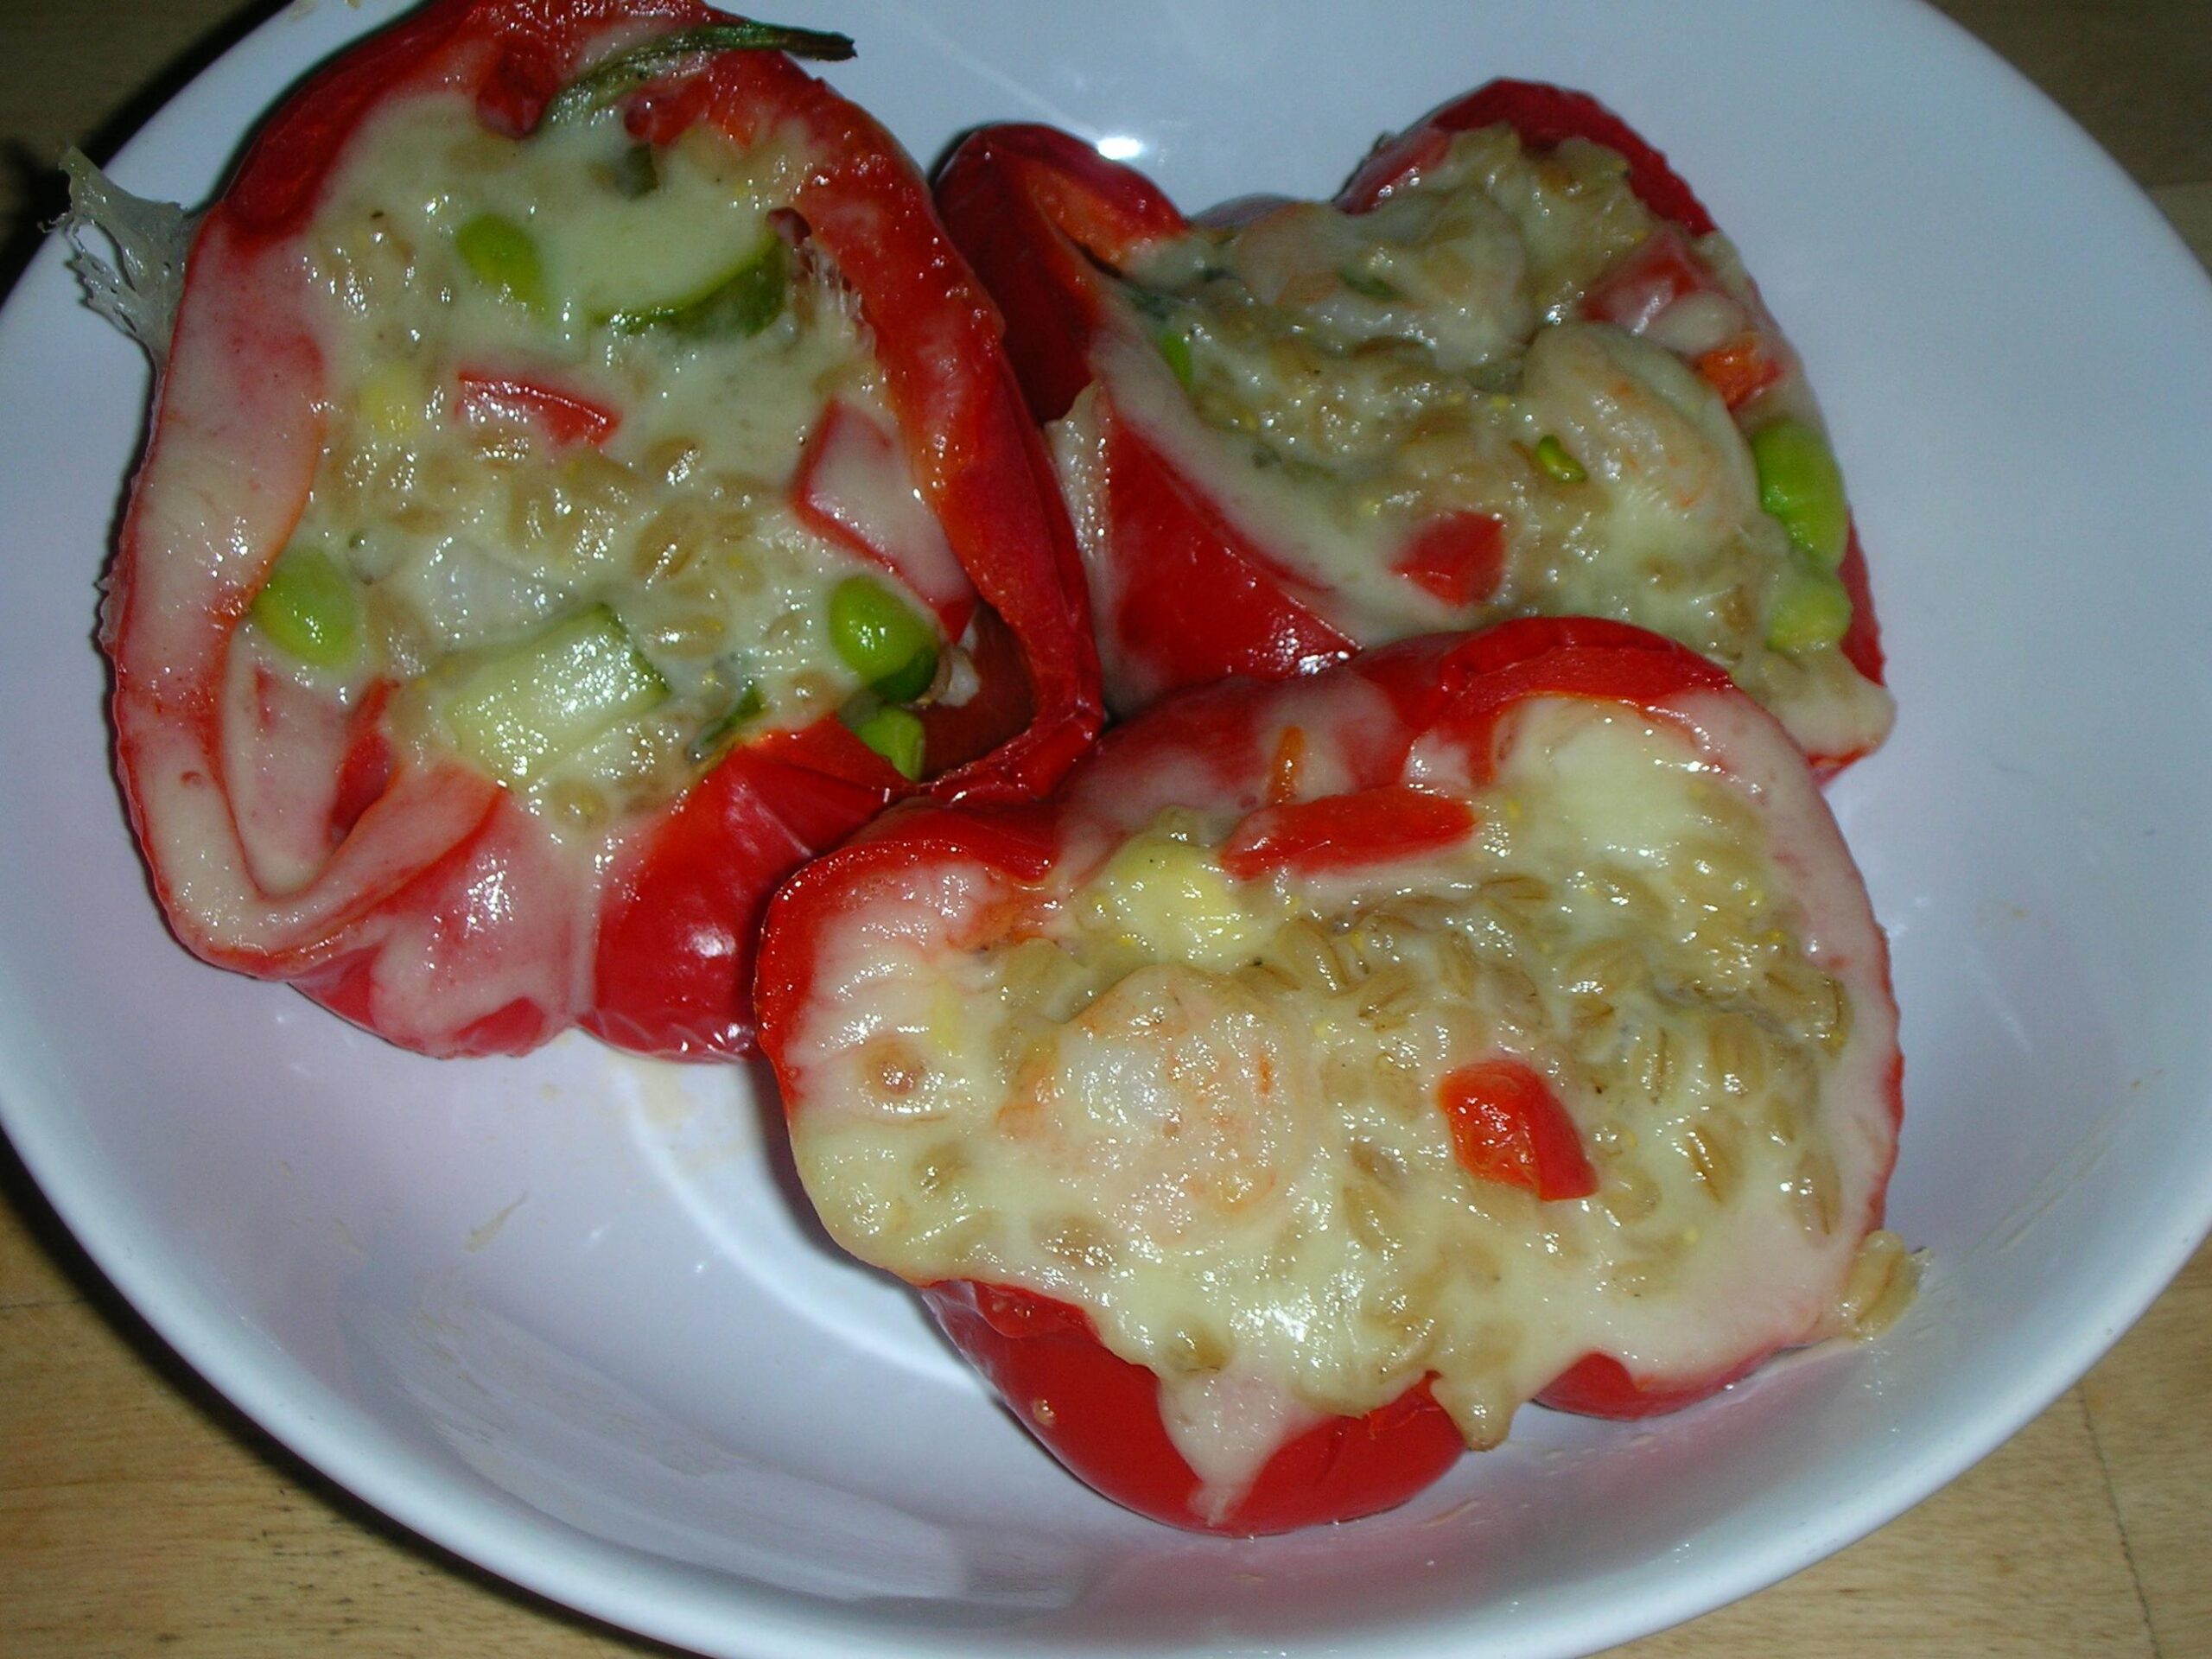  Have a meal that is both satisfying and guilt-free with these vegetarian stuffed bell peppers